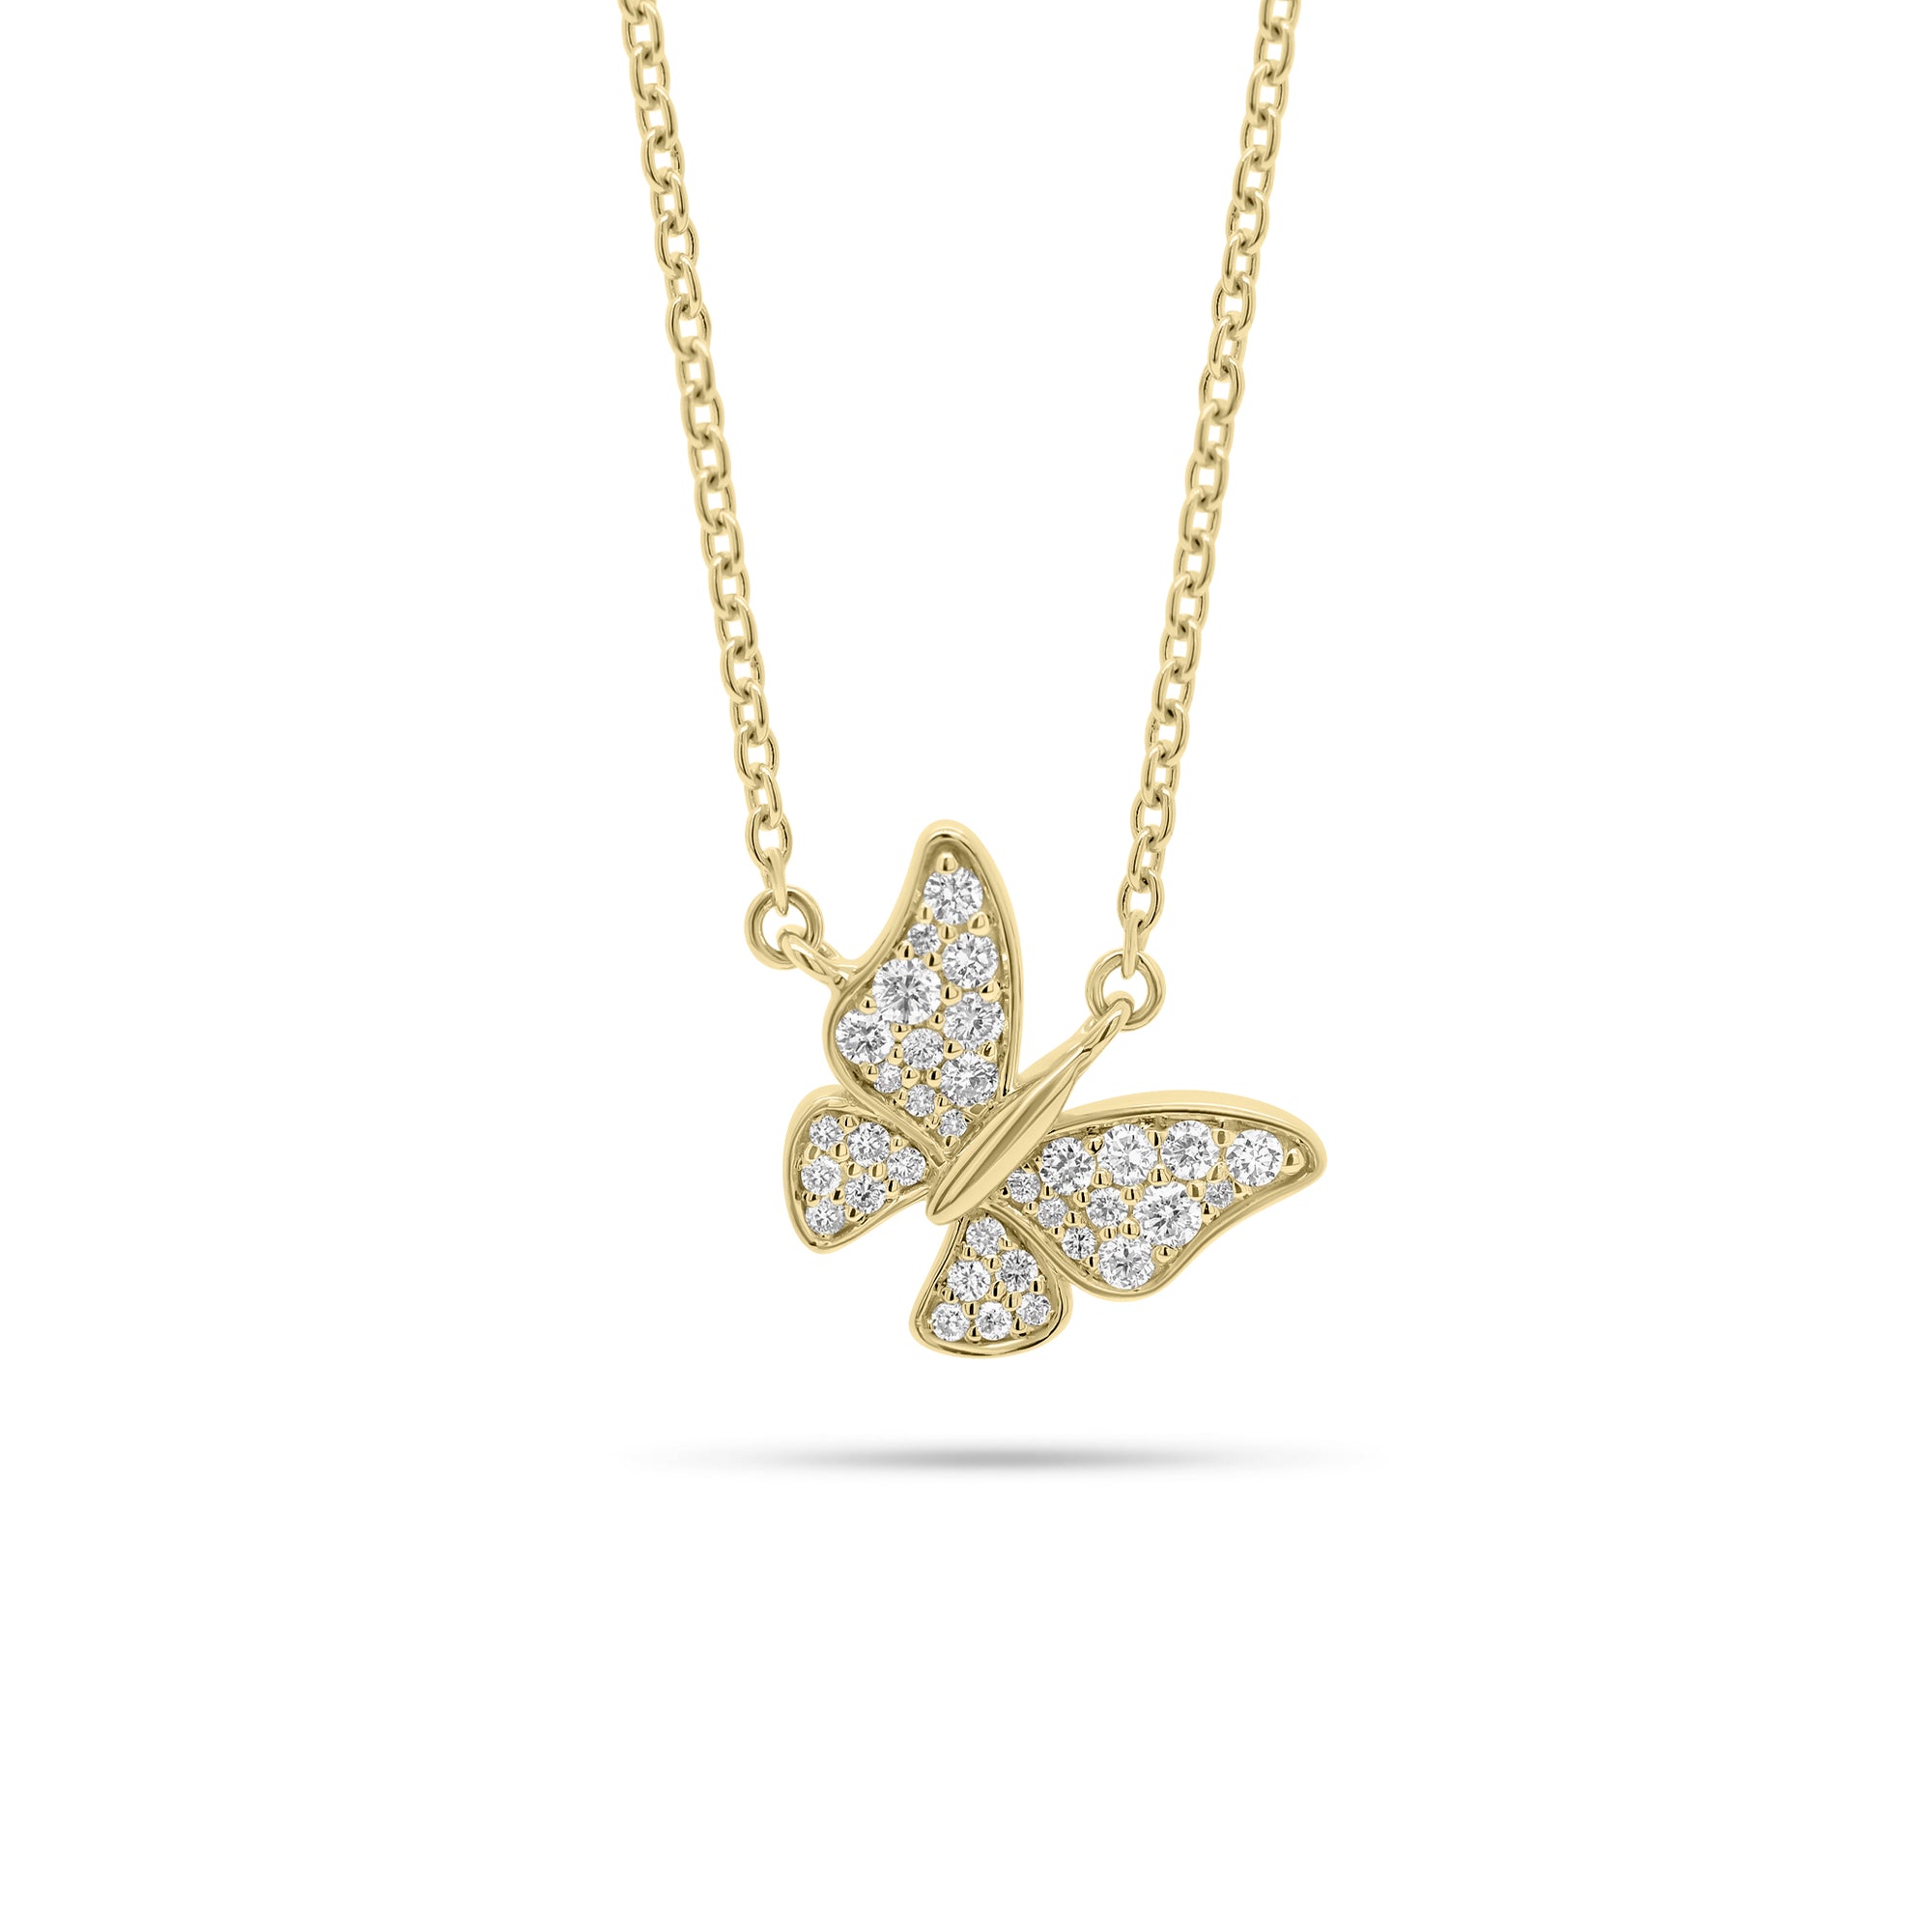 Pave Diamond Fluttery Butterfly Pendant Necklace - 14K gold weighing 5.10 grams  - 34 round diamonds weighing 0.37 carats